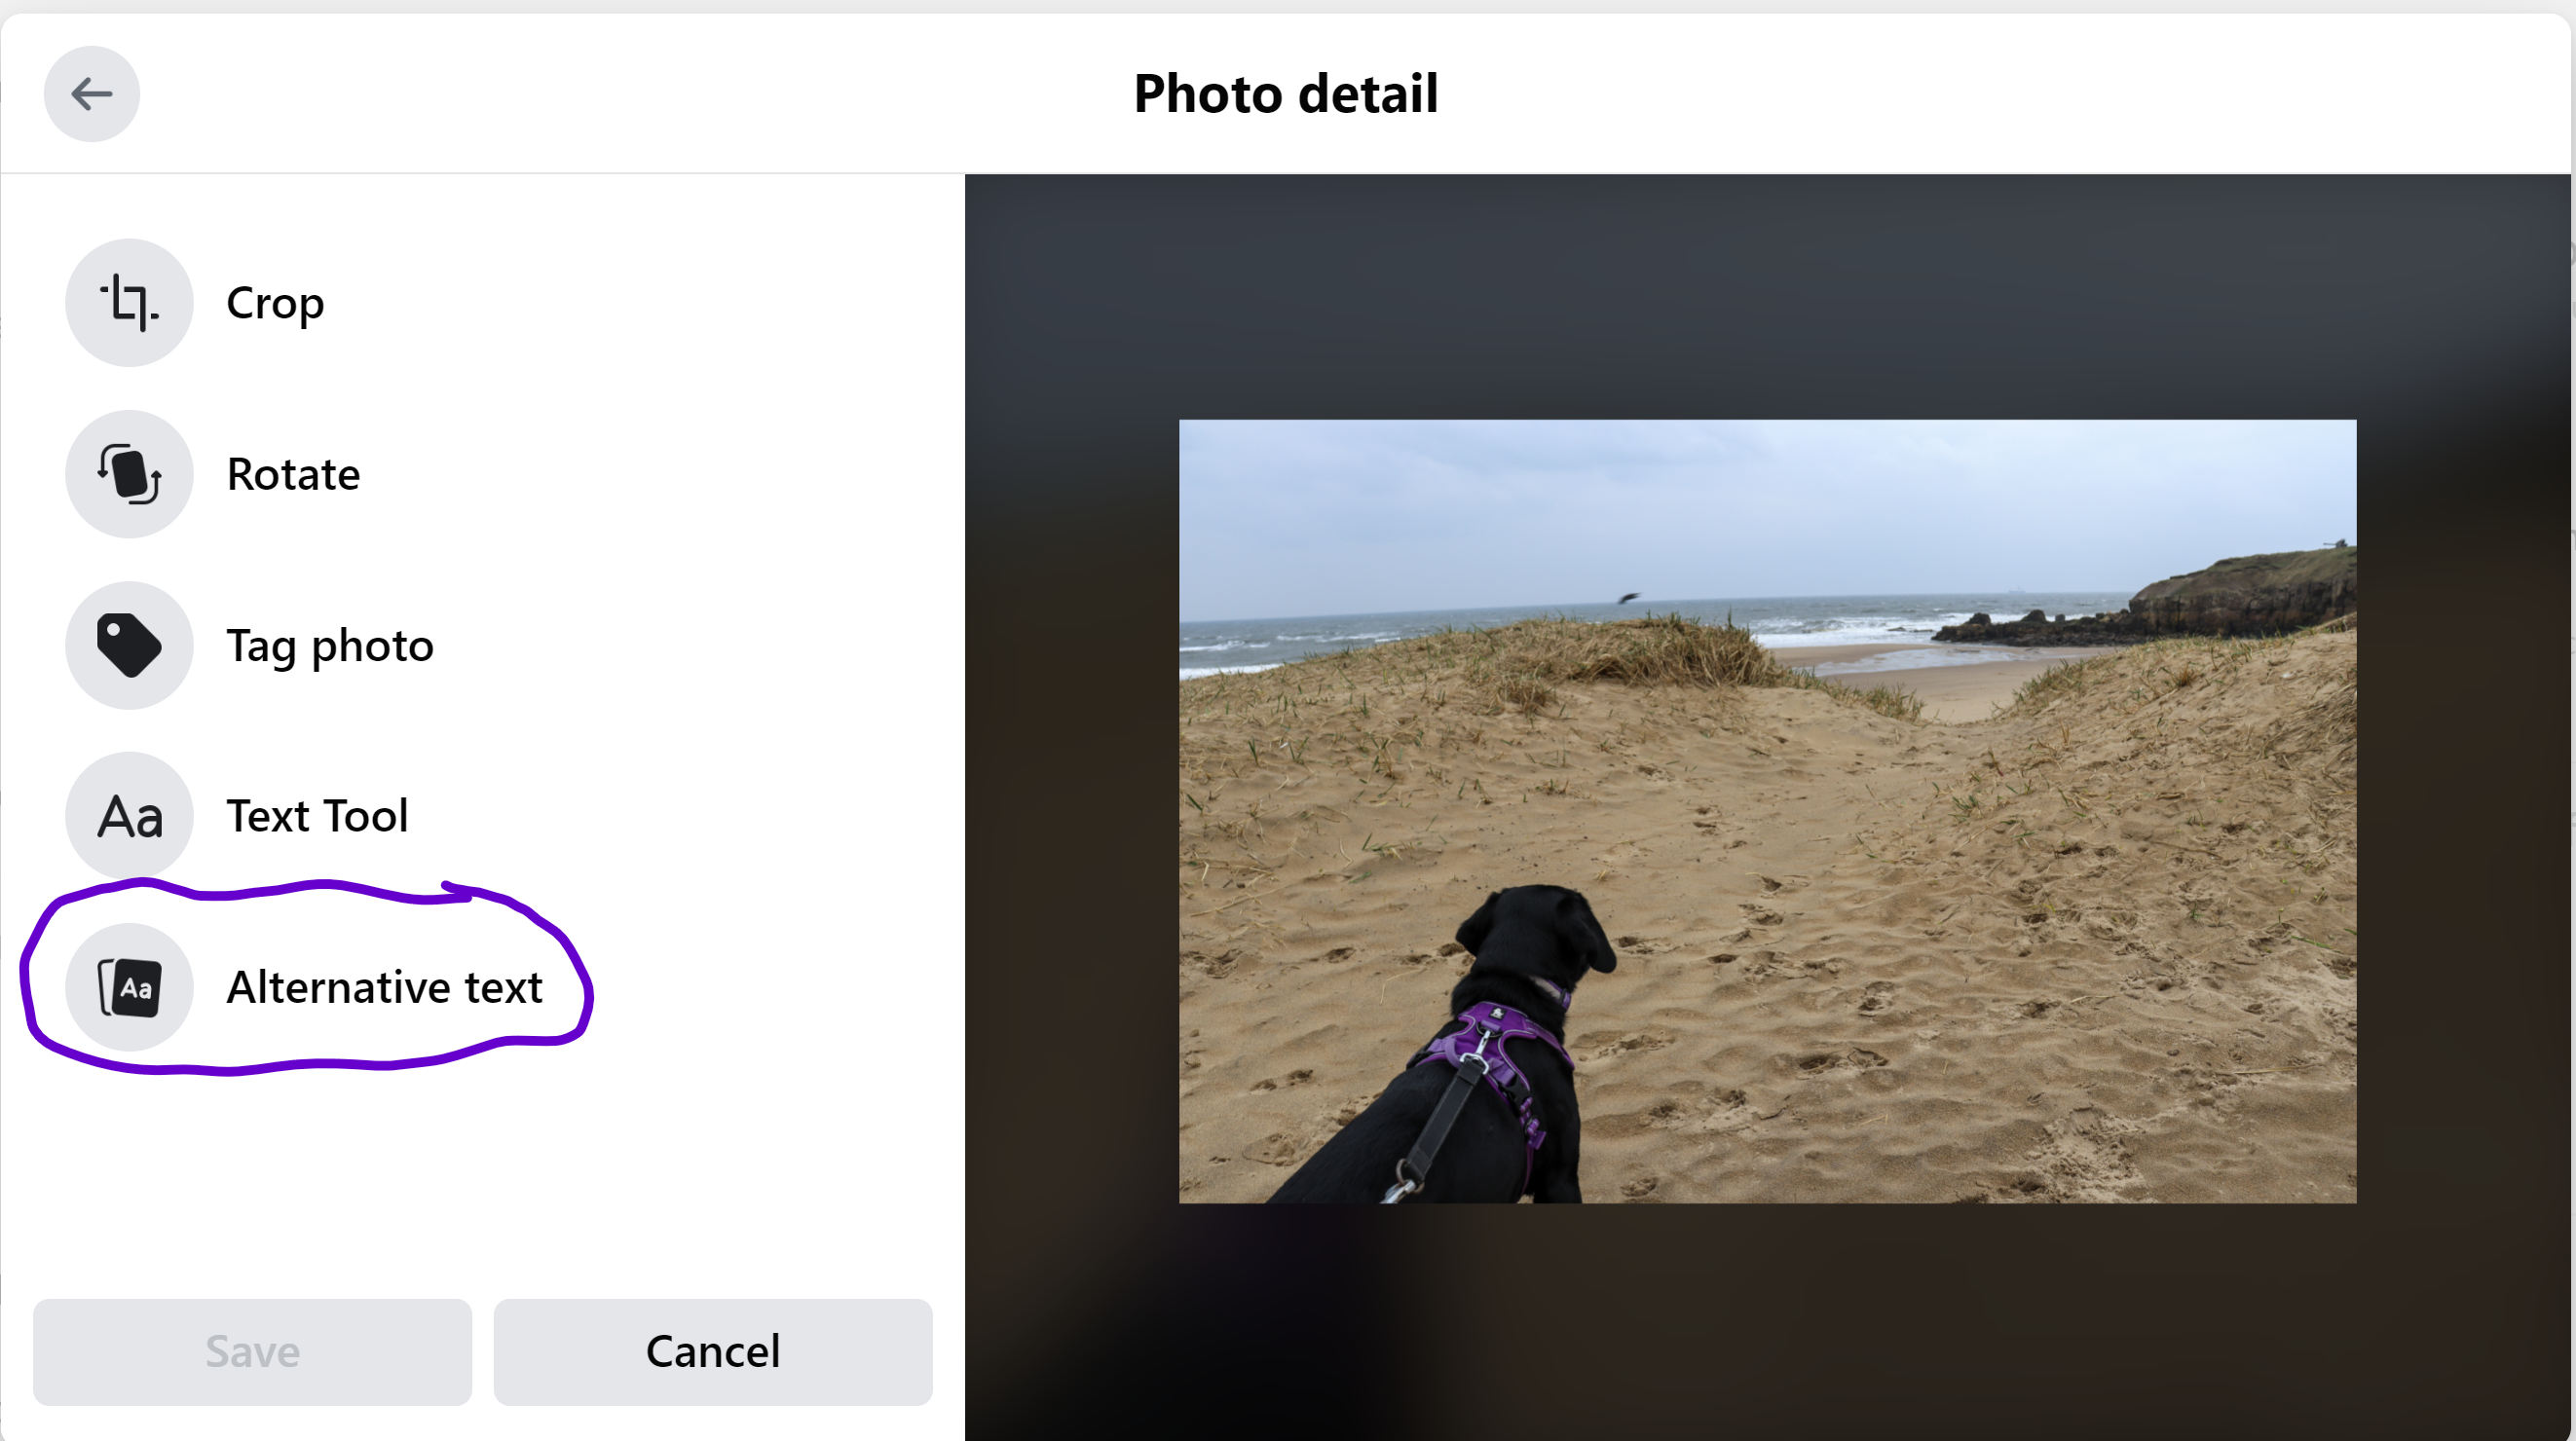 Screenshot of the photo detail box with alternative text circled.